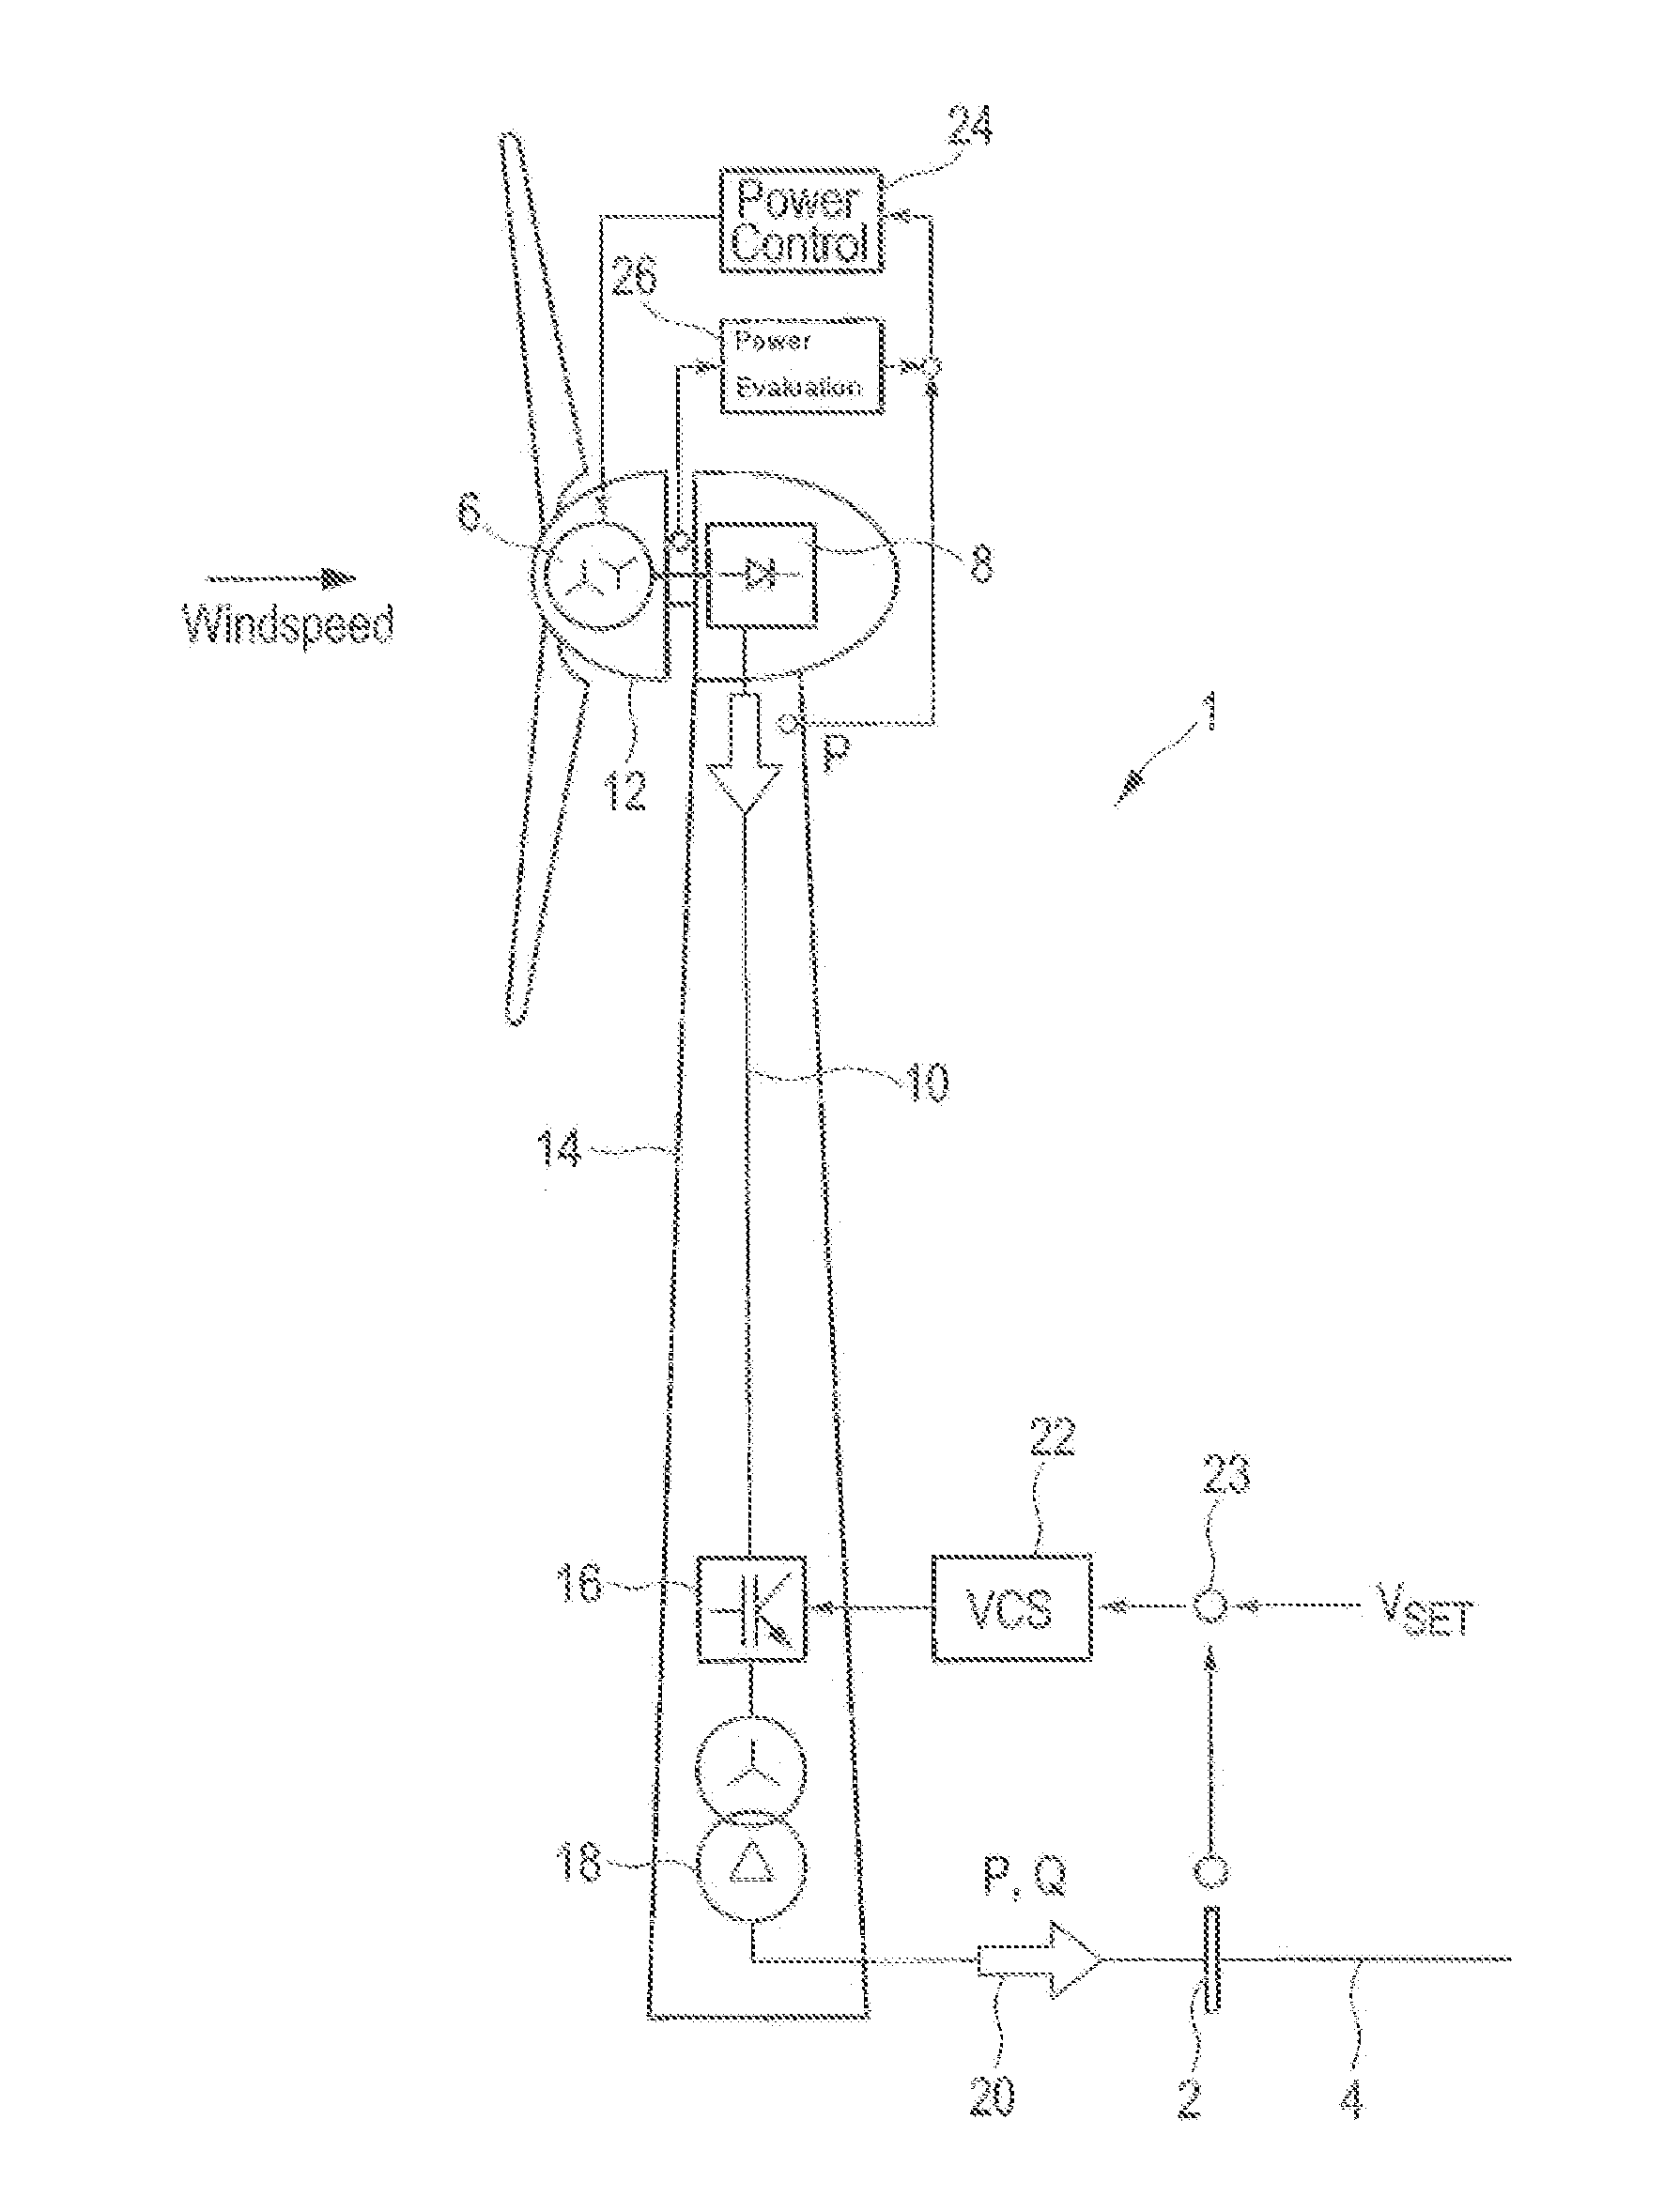 Method and apparatus for feeding electric energy into an electric supply grid